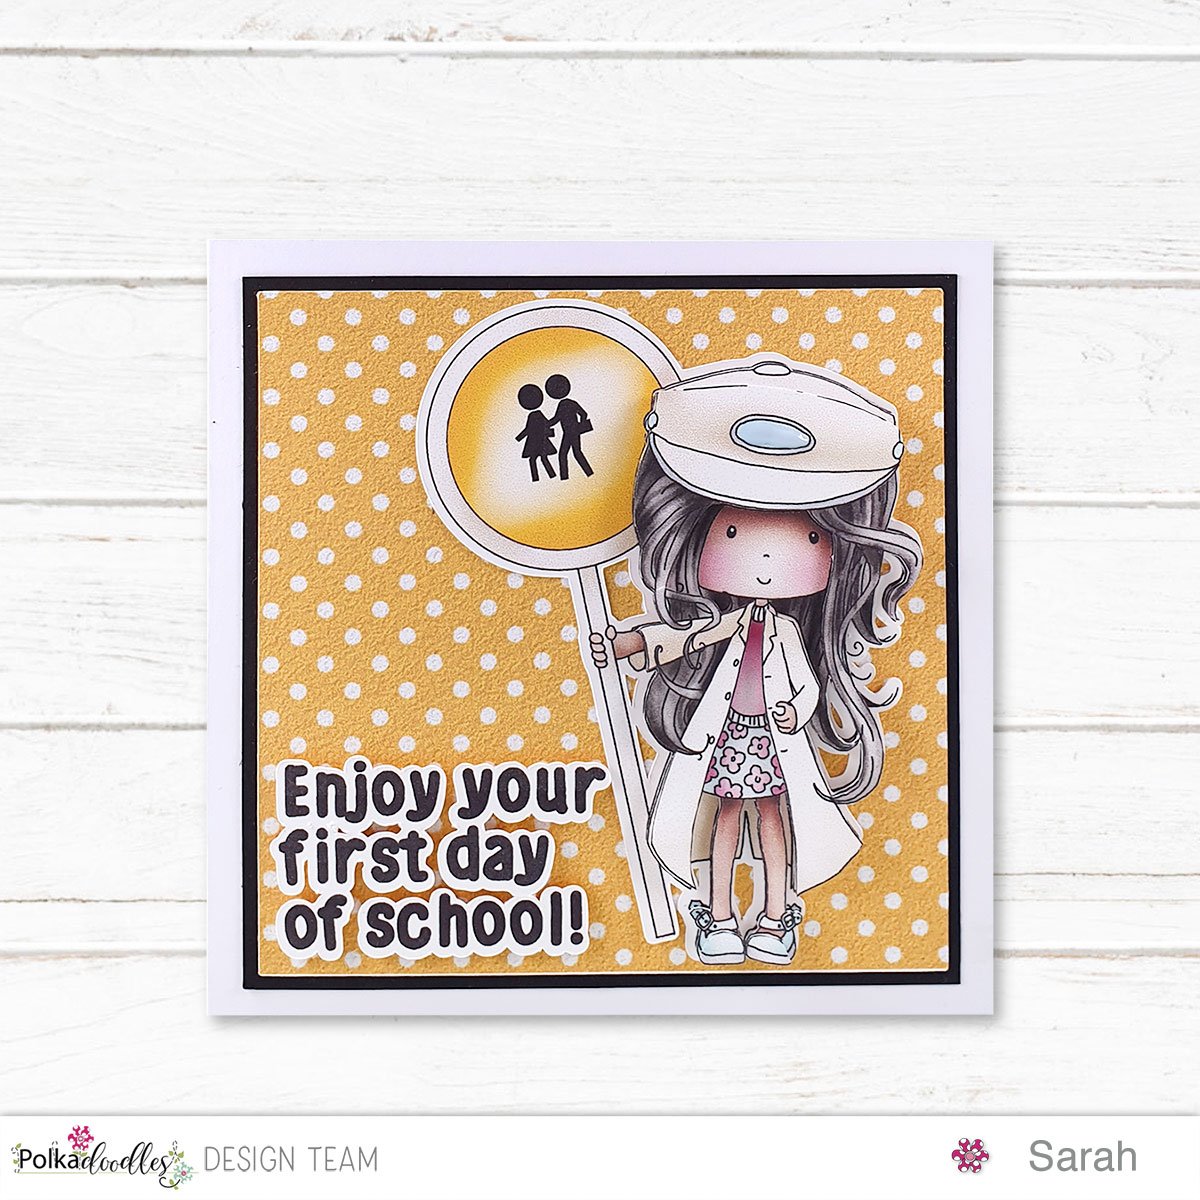 First Day of School Card created by Sarah Phelan from Sarahs Stampin Retreat using digital images from Polkadoodles